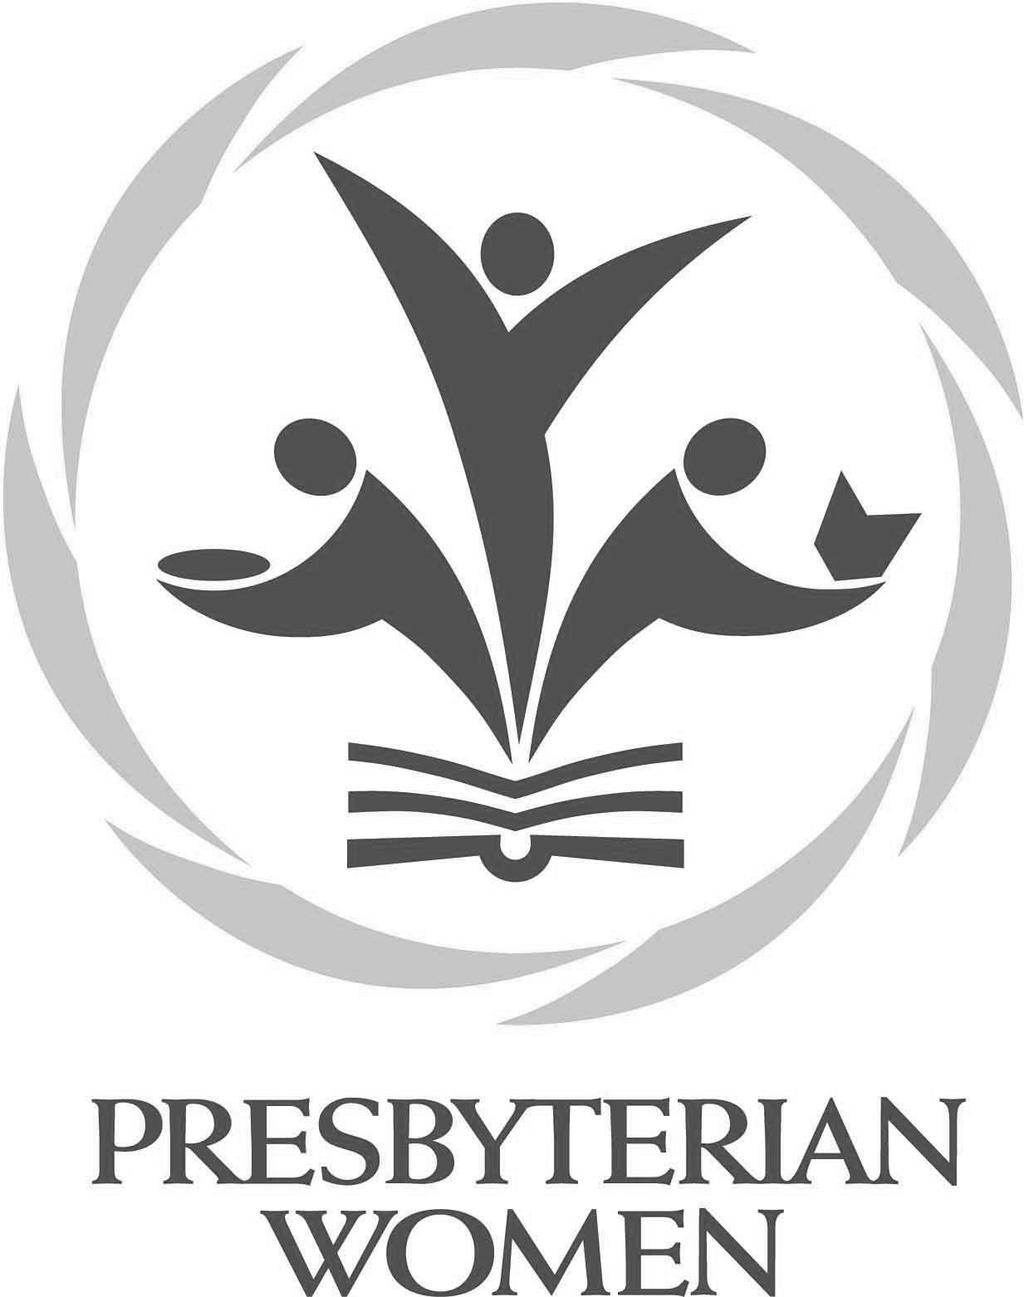 Presbyterian Women Presbyterian Women s Coordinating Team will meet on March 7 in the Conference Room.